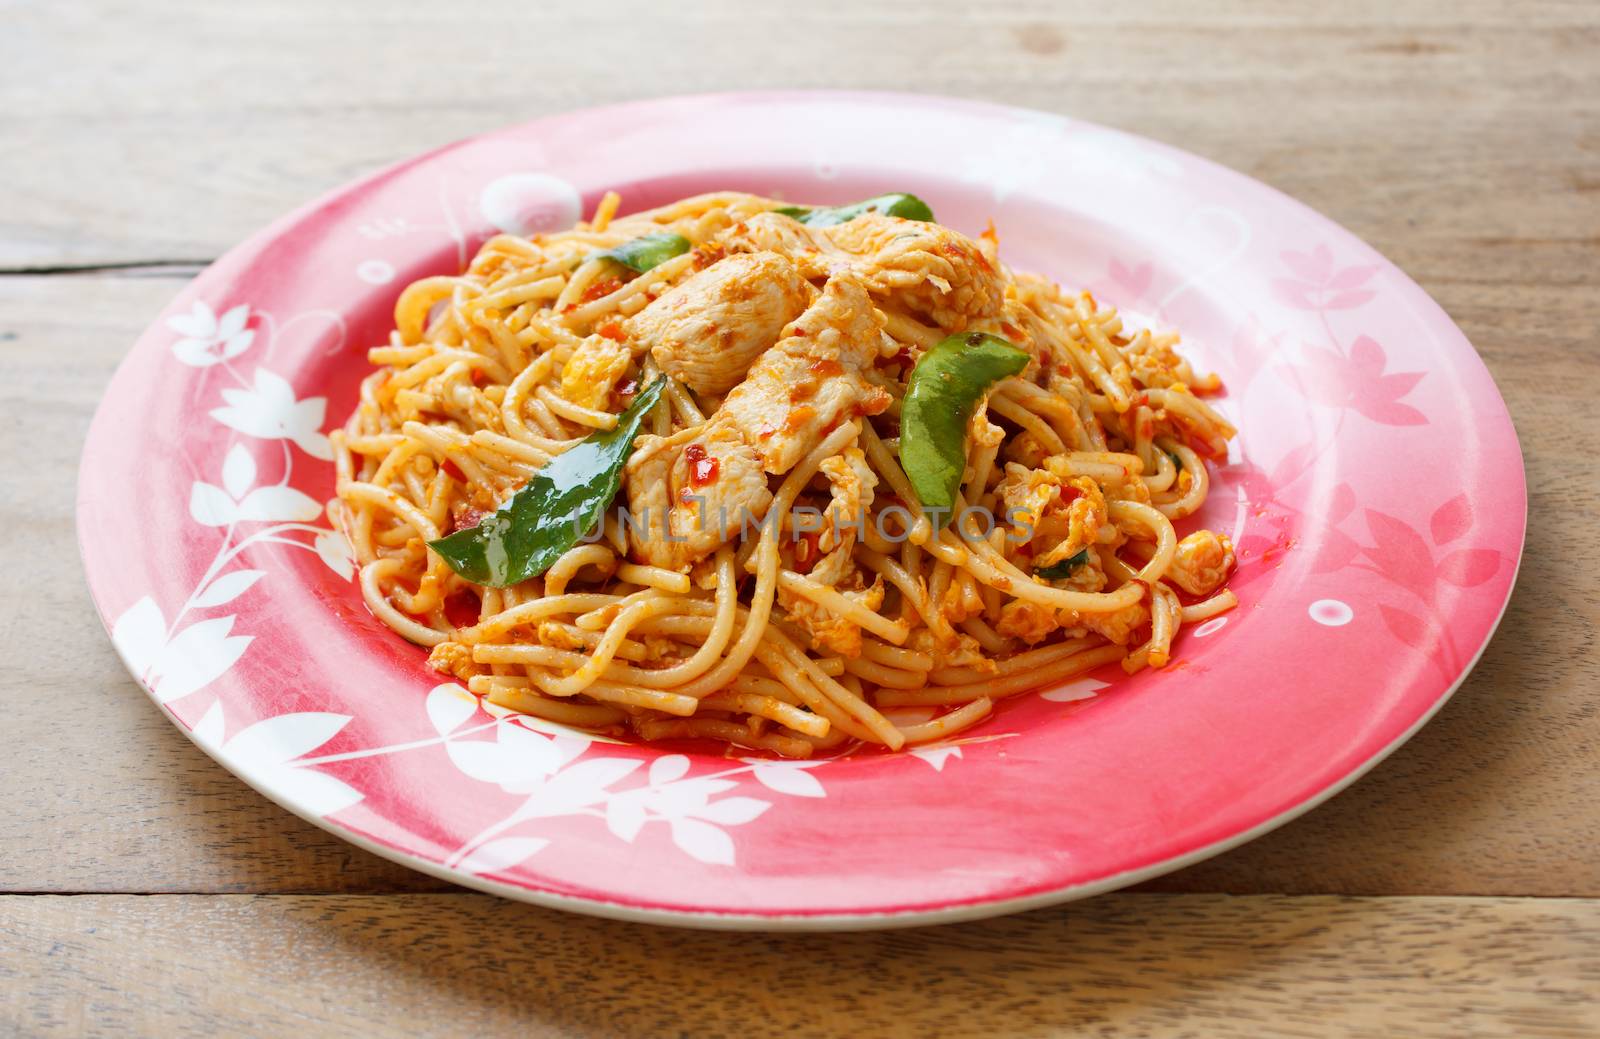 Stir Fried Spaghetti with Chicken in Chilli paste by vitawin